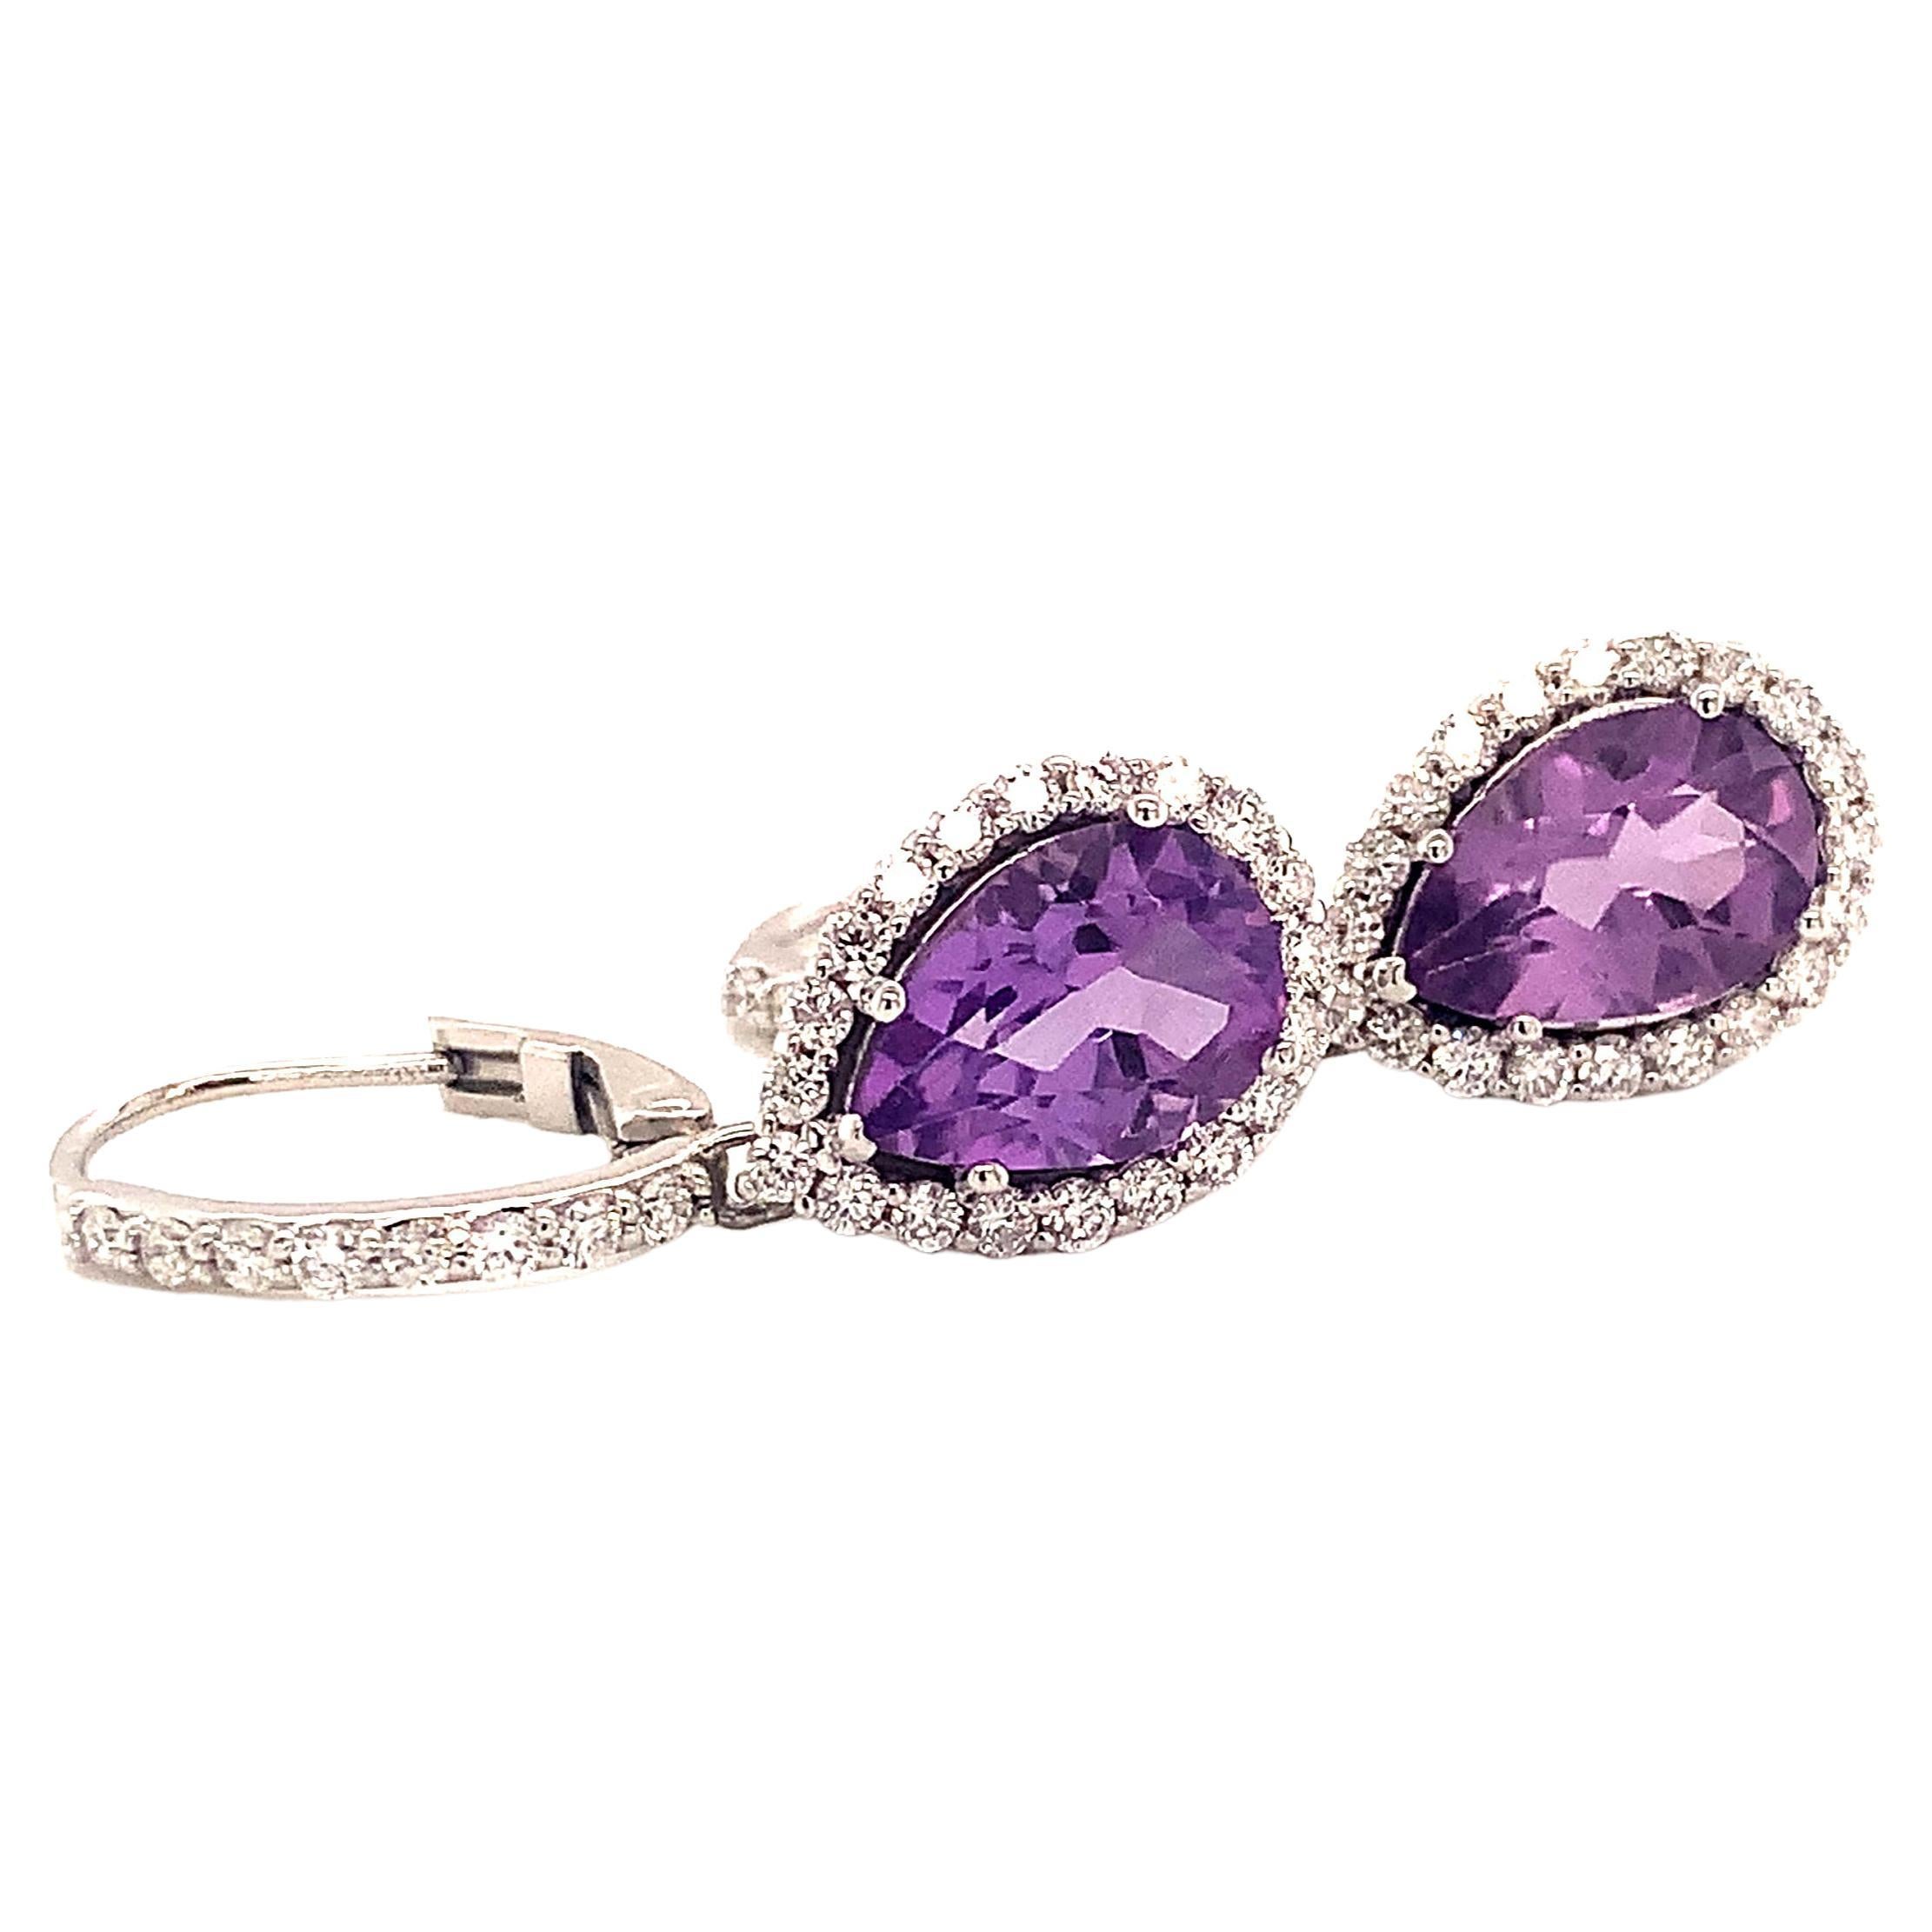 Natural Finely Faceted Quality Amethyst Diamond Earrings 14k Gold 4.25 TCW Certified $3,950 120527

Please look at the video attached for this item. With the video you can see the movement of the item and appreciate the faceting and details